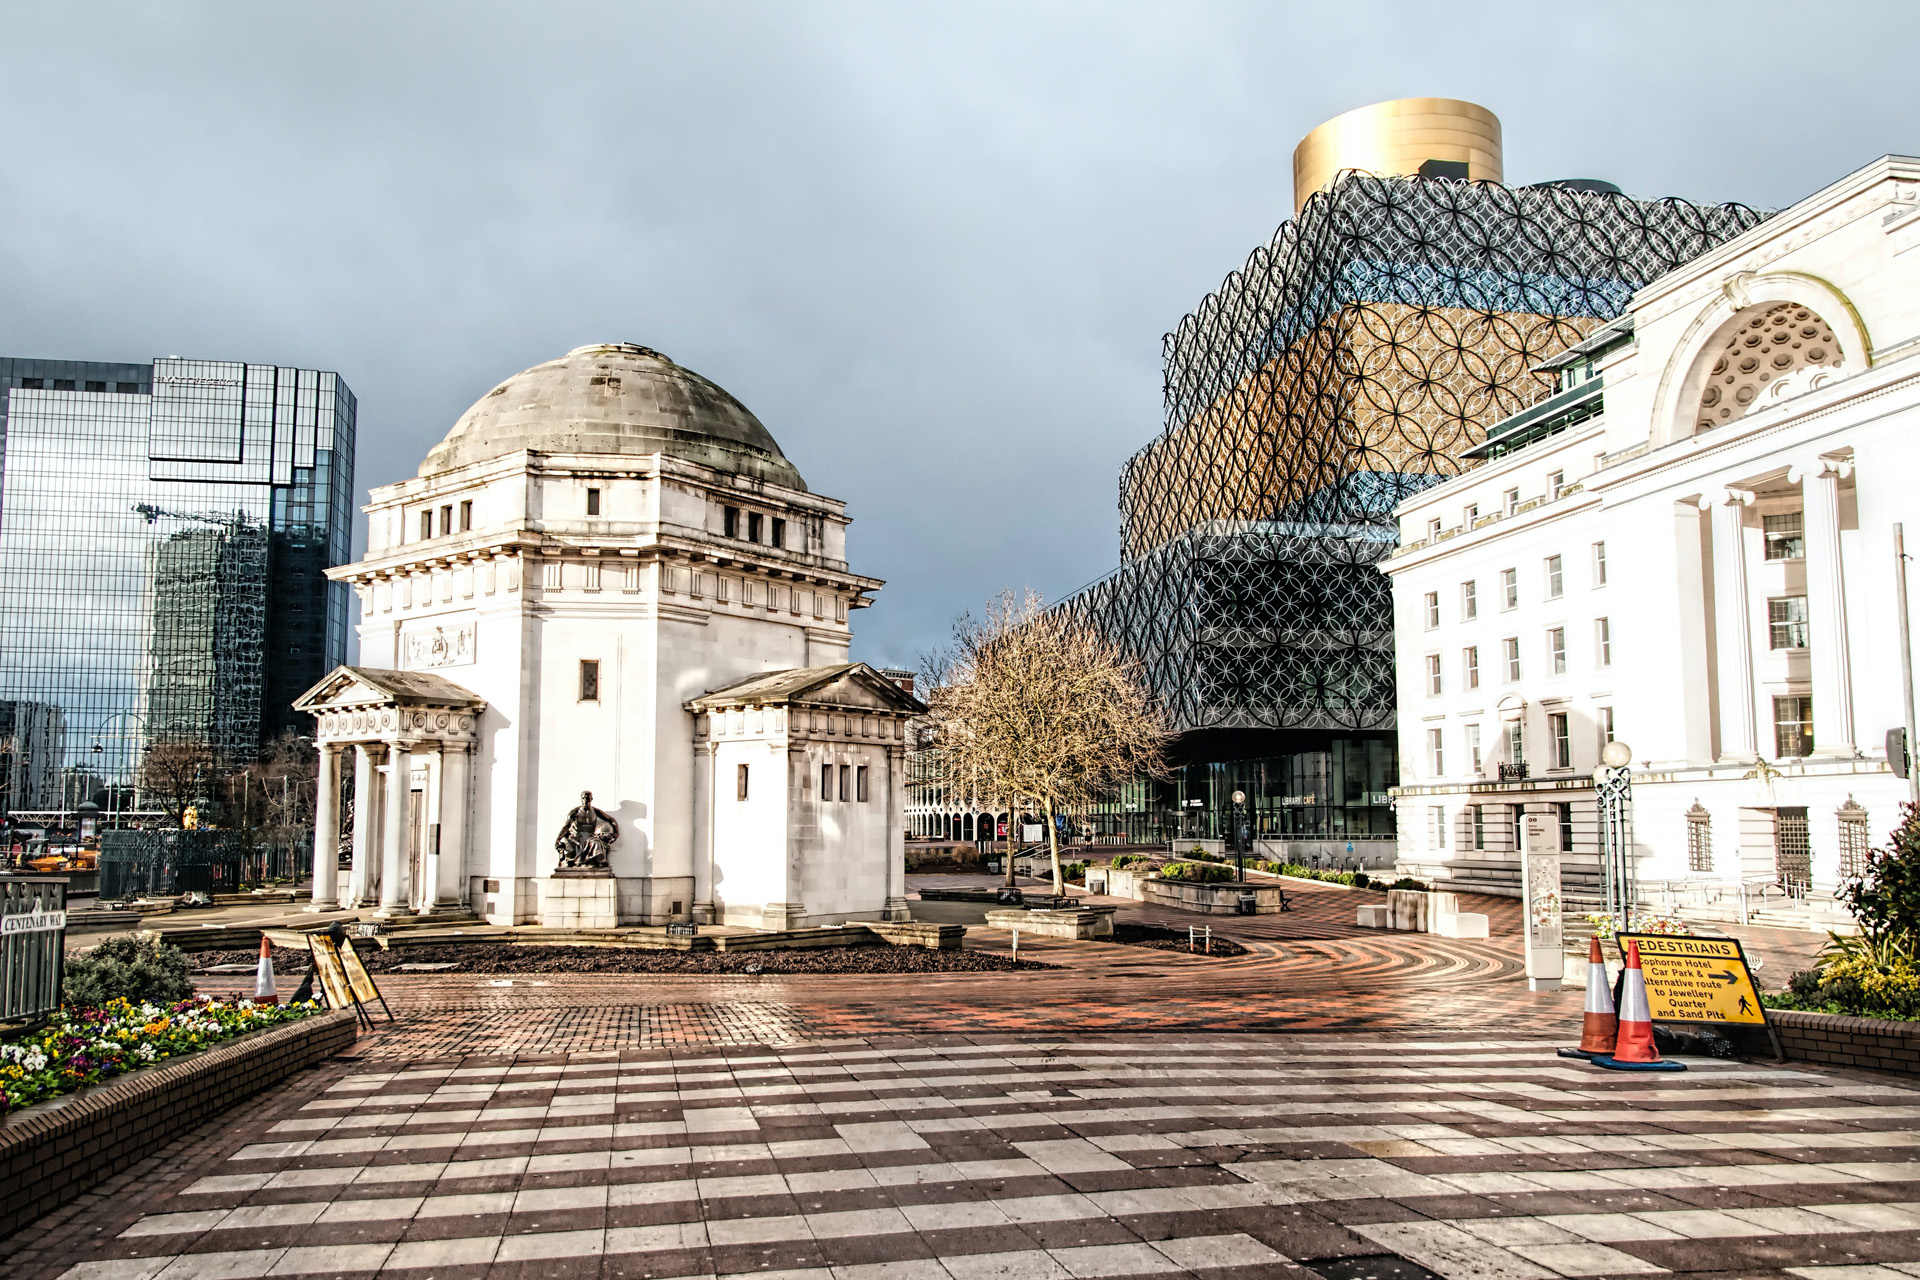 Birmingham is a new commuter town attracting Londoners